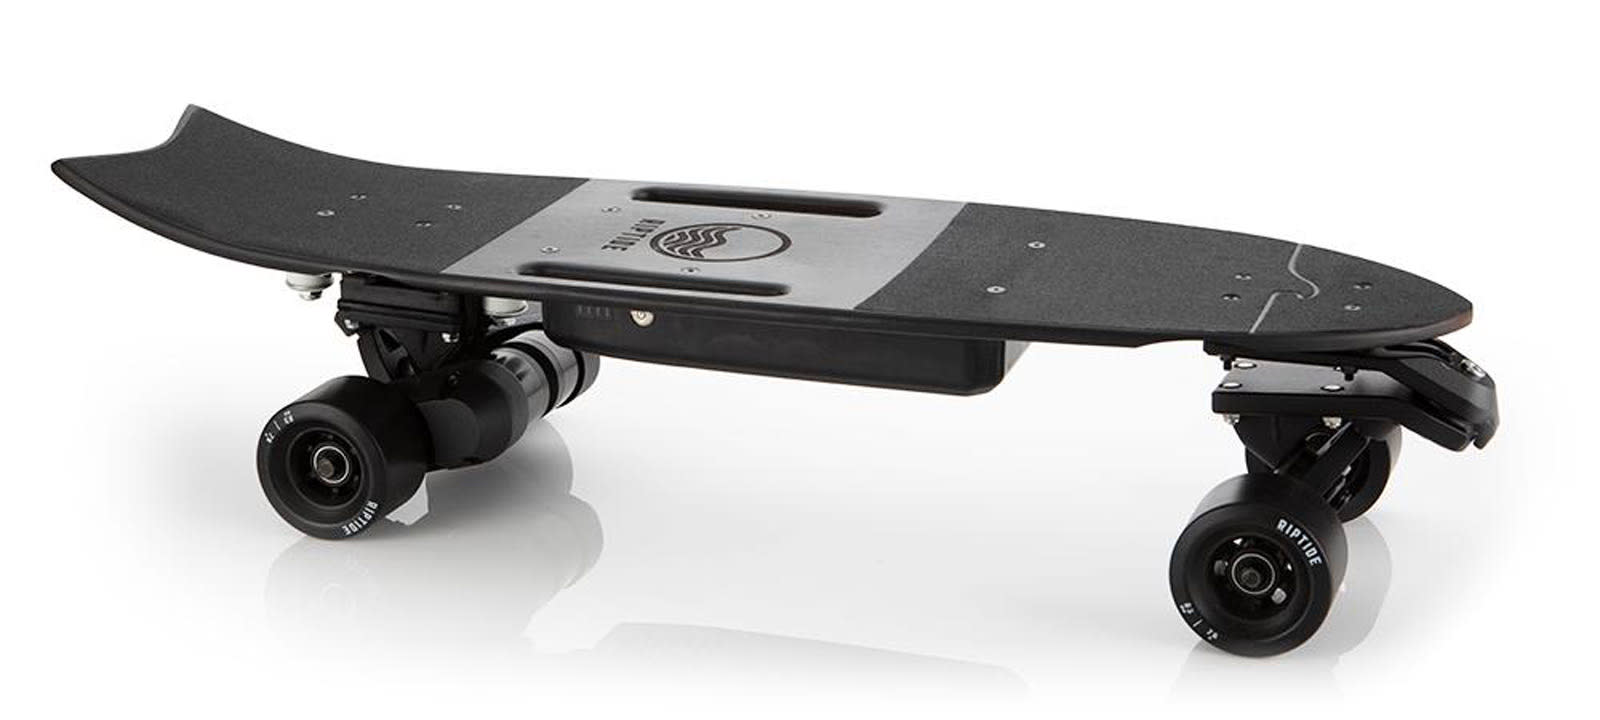 Riptide's latest electric skateboard carves like a surfboard | Engadget